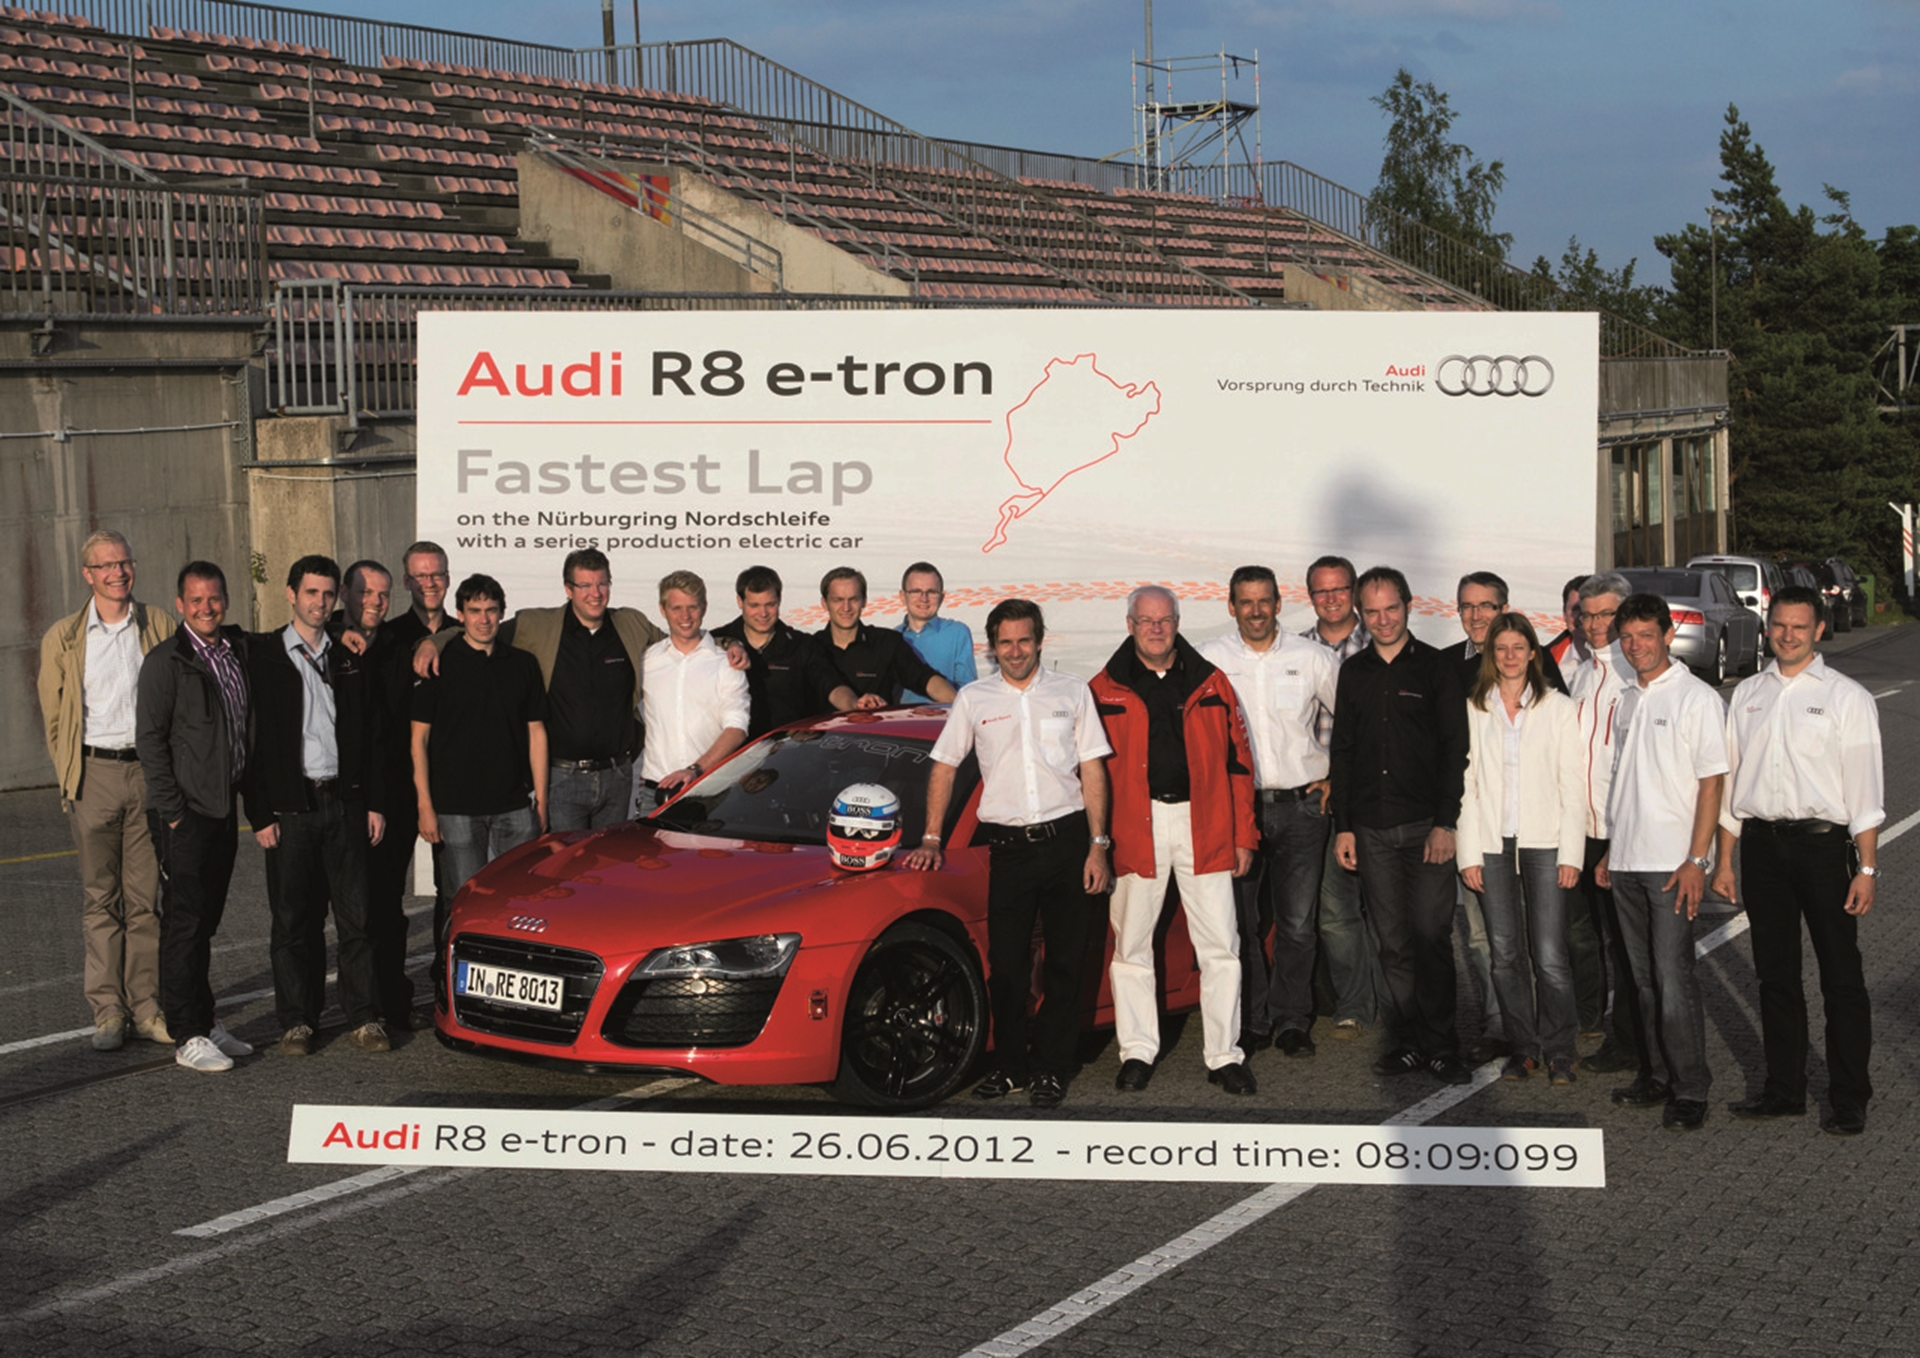 World record for the Audi R8 e-tron: with 8:09.099 minutes at the Nürburgring